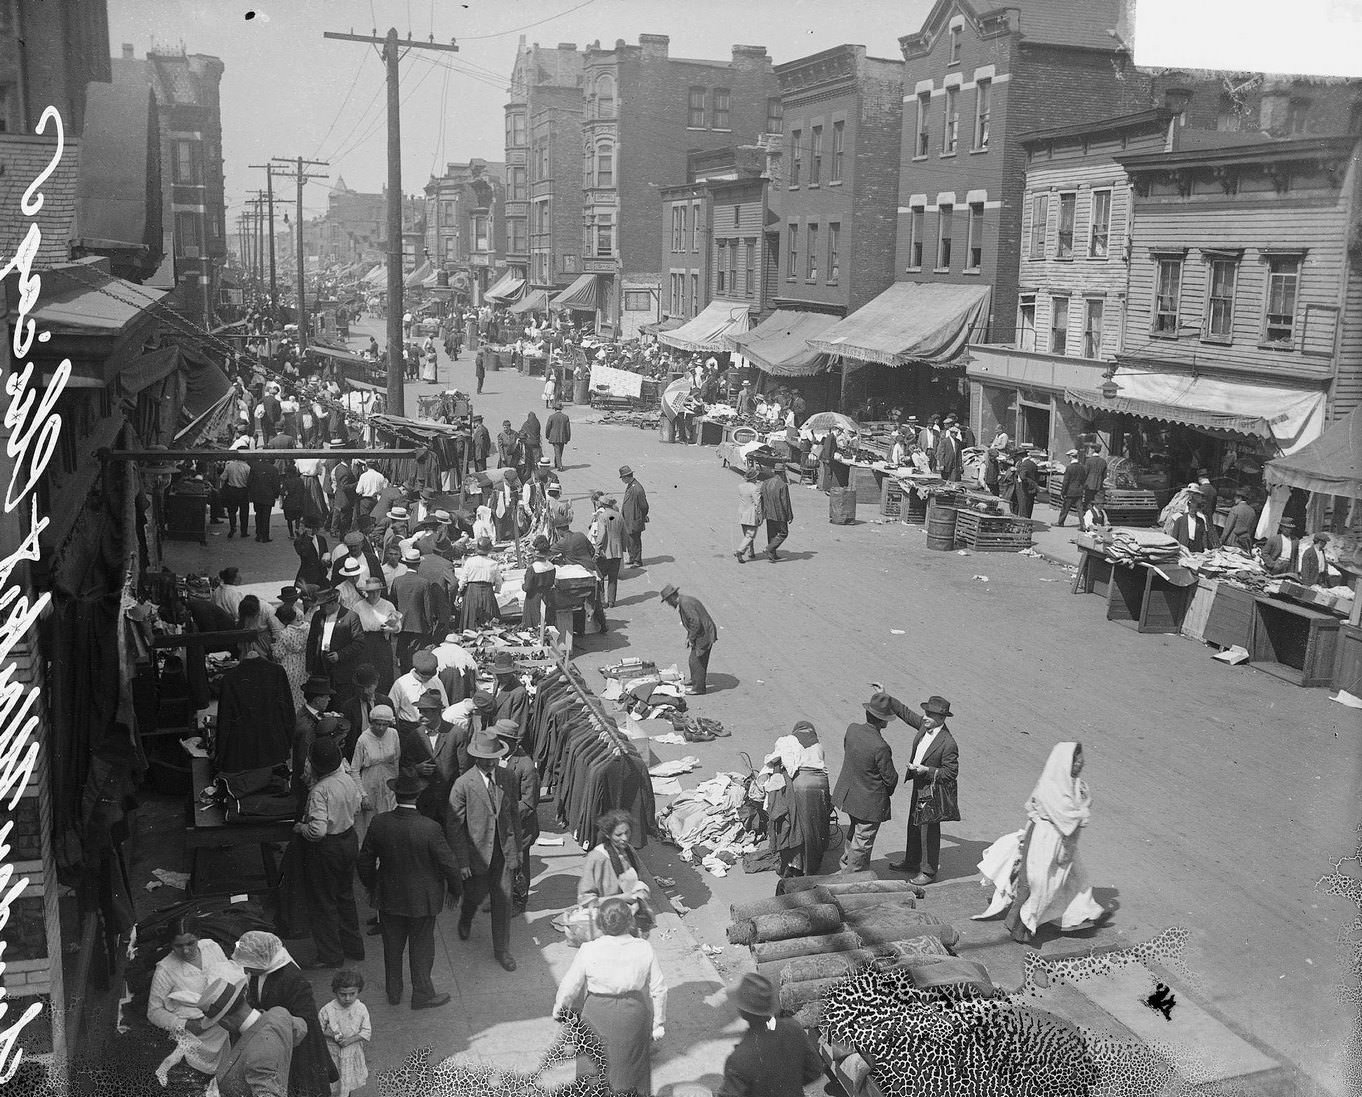 The merchants and shoppers along Maxwell Street at the Sunday market in the city's Jewish community located in the Near West Side community area, Chicago, Illinois, 1917.